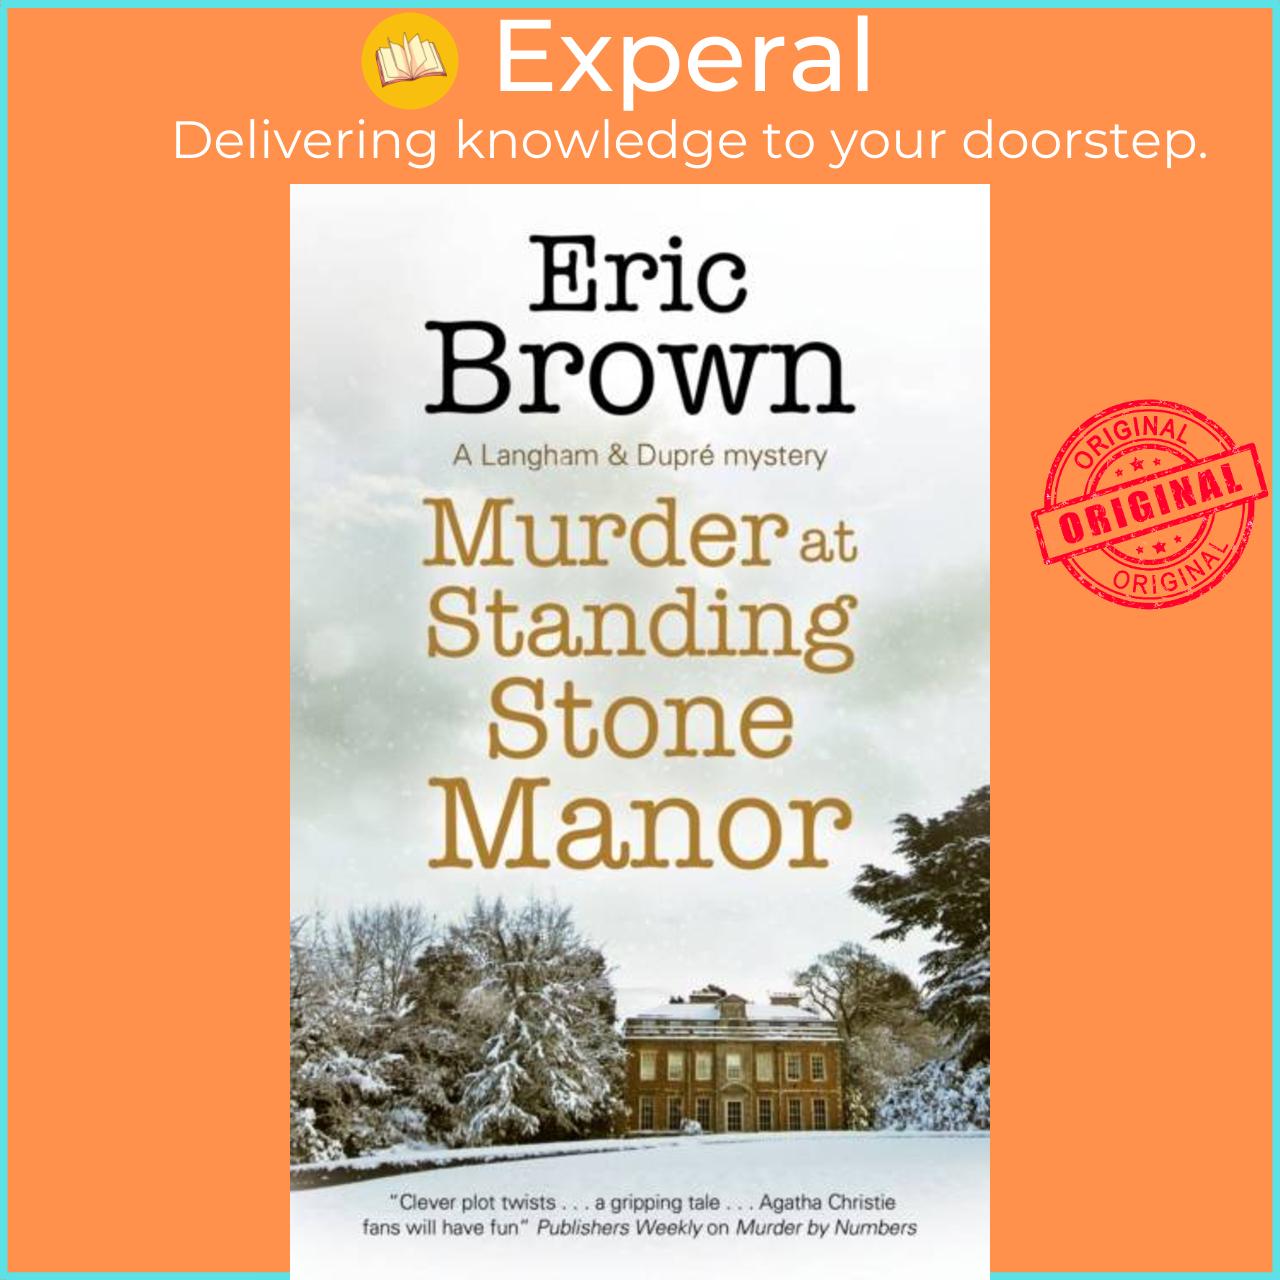 Sách - Murder at Standing Stone Manor by Eric Brown (UK edition, hardcover)